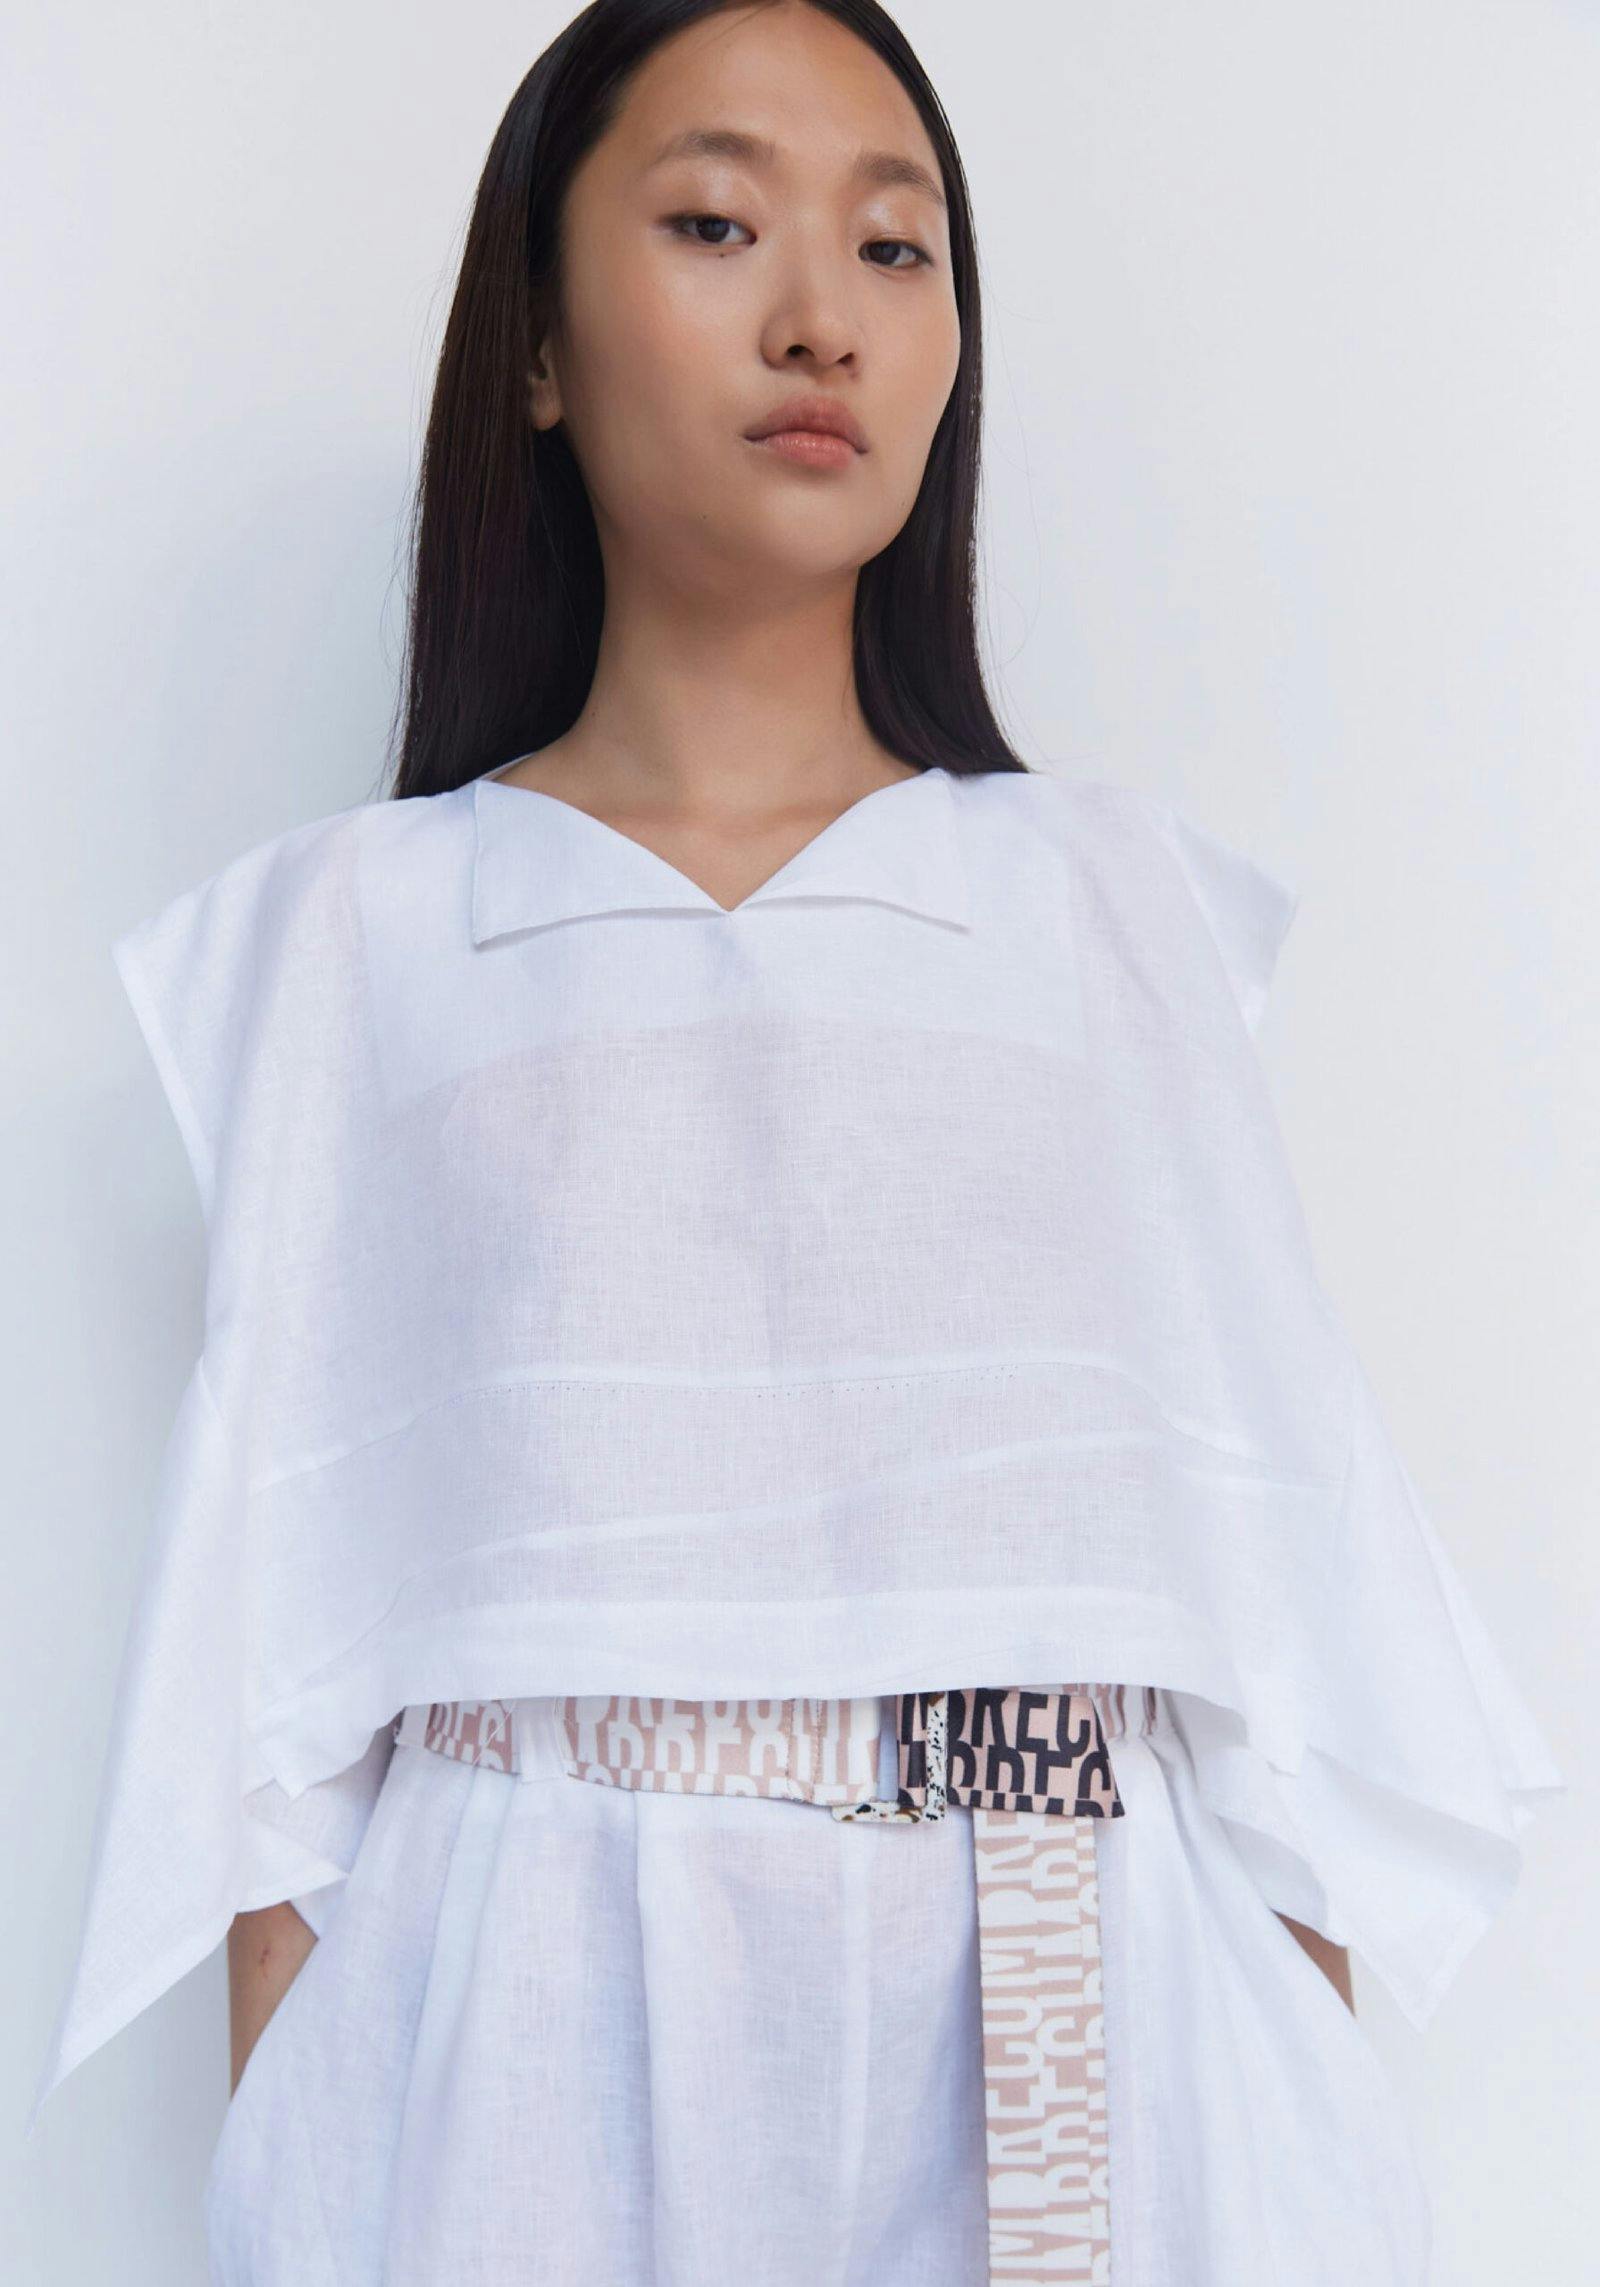 White Top: Item 007 White, a product by Studio cumbre